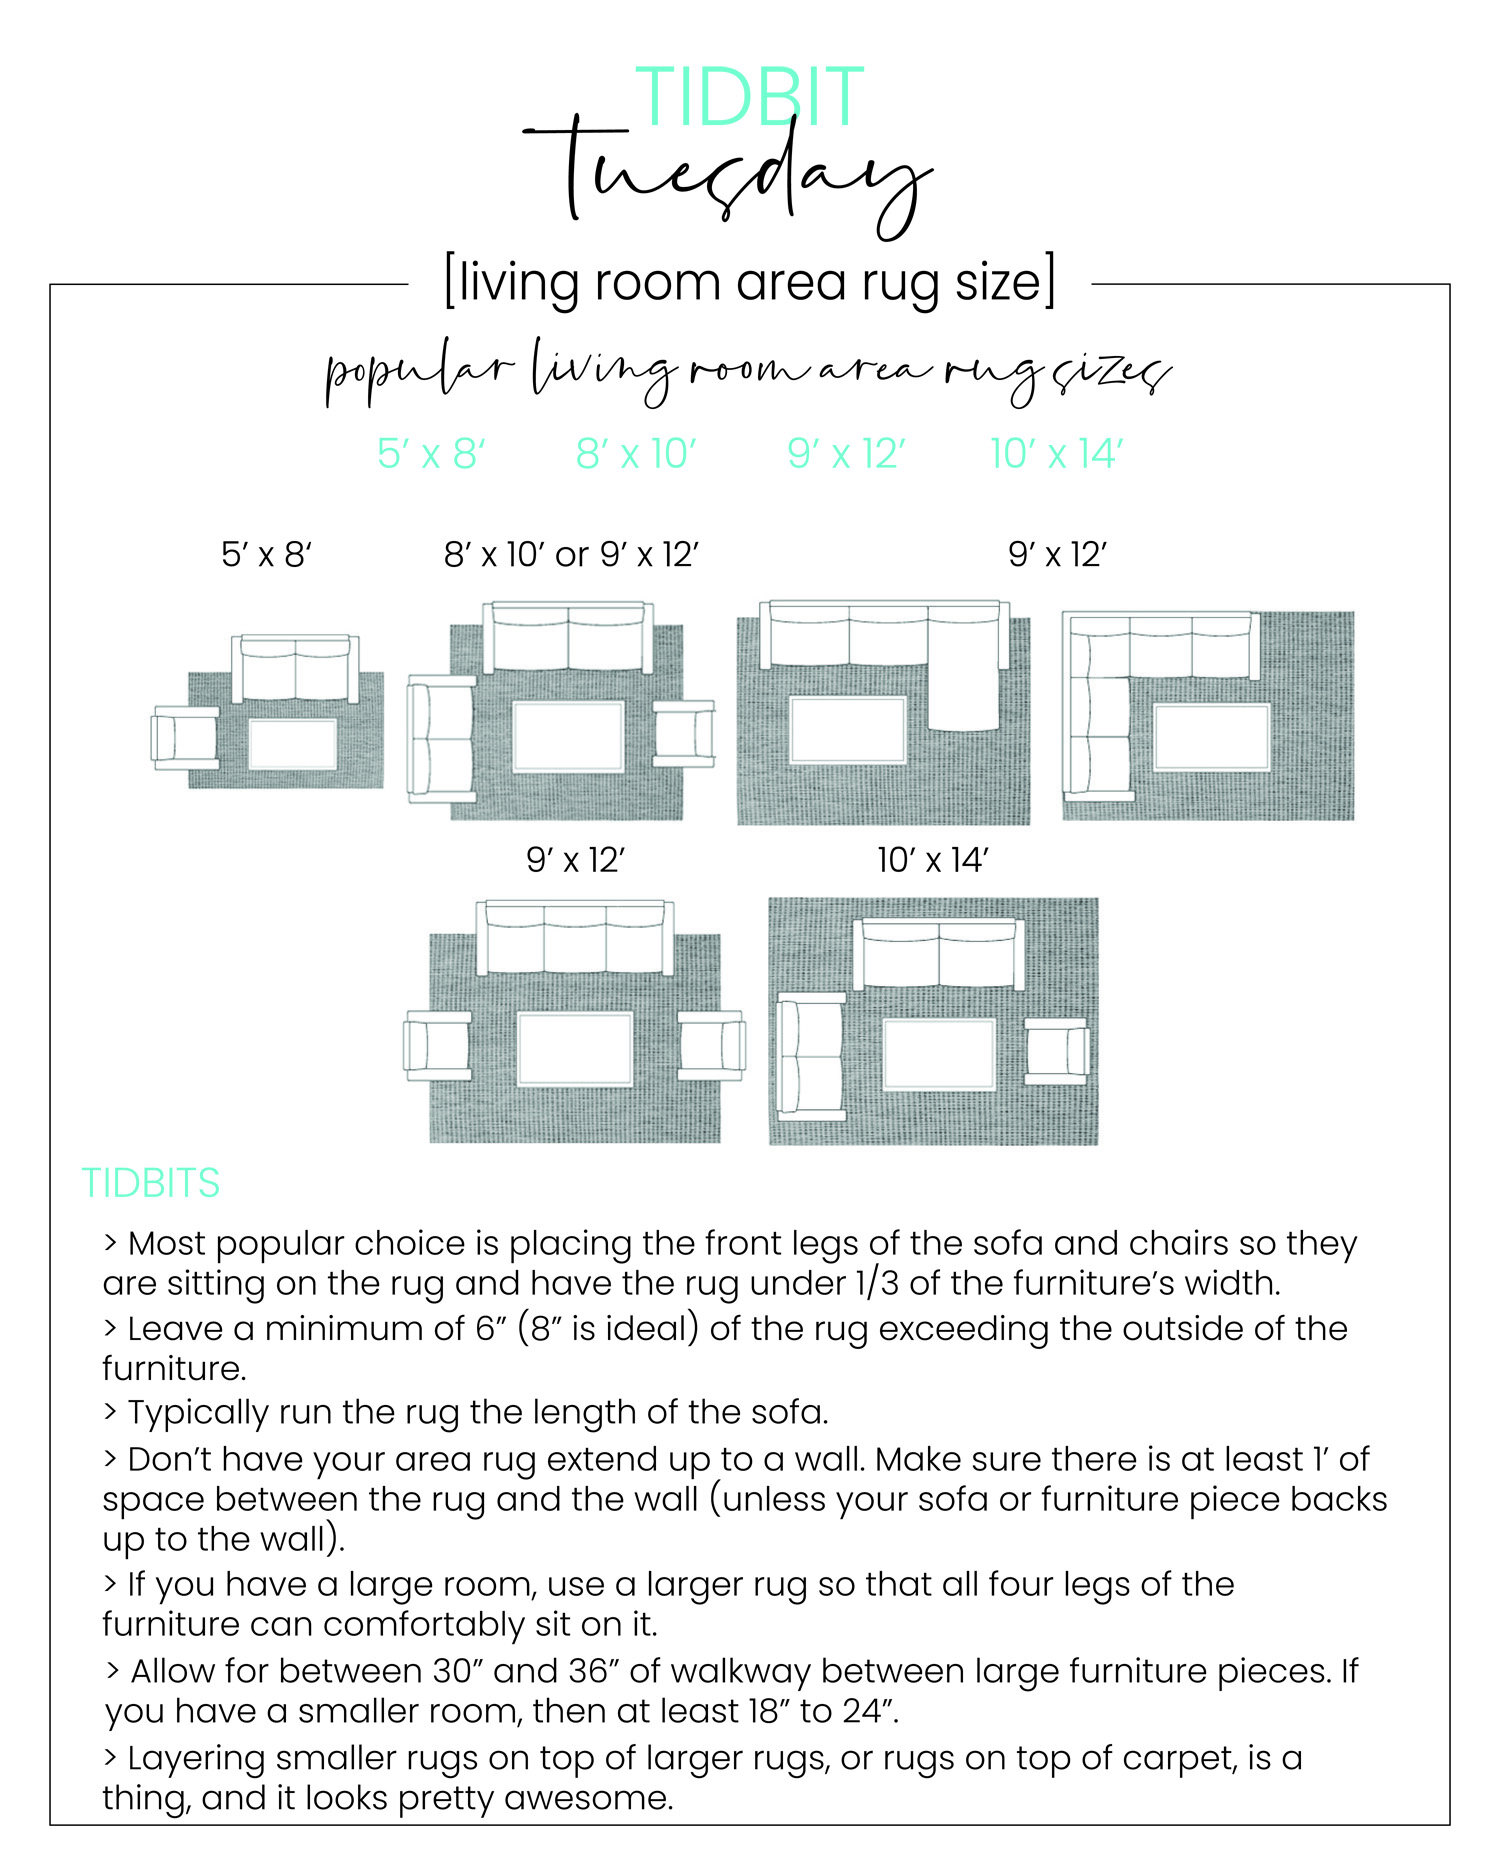 Tidbit Tuesday Area Rug Size Living, Living Room Area Rug Dimensions